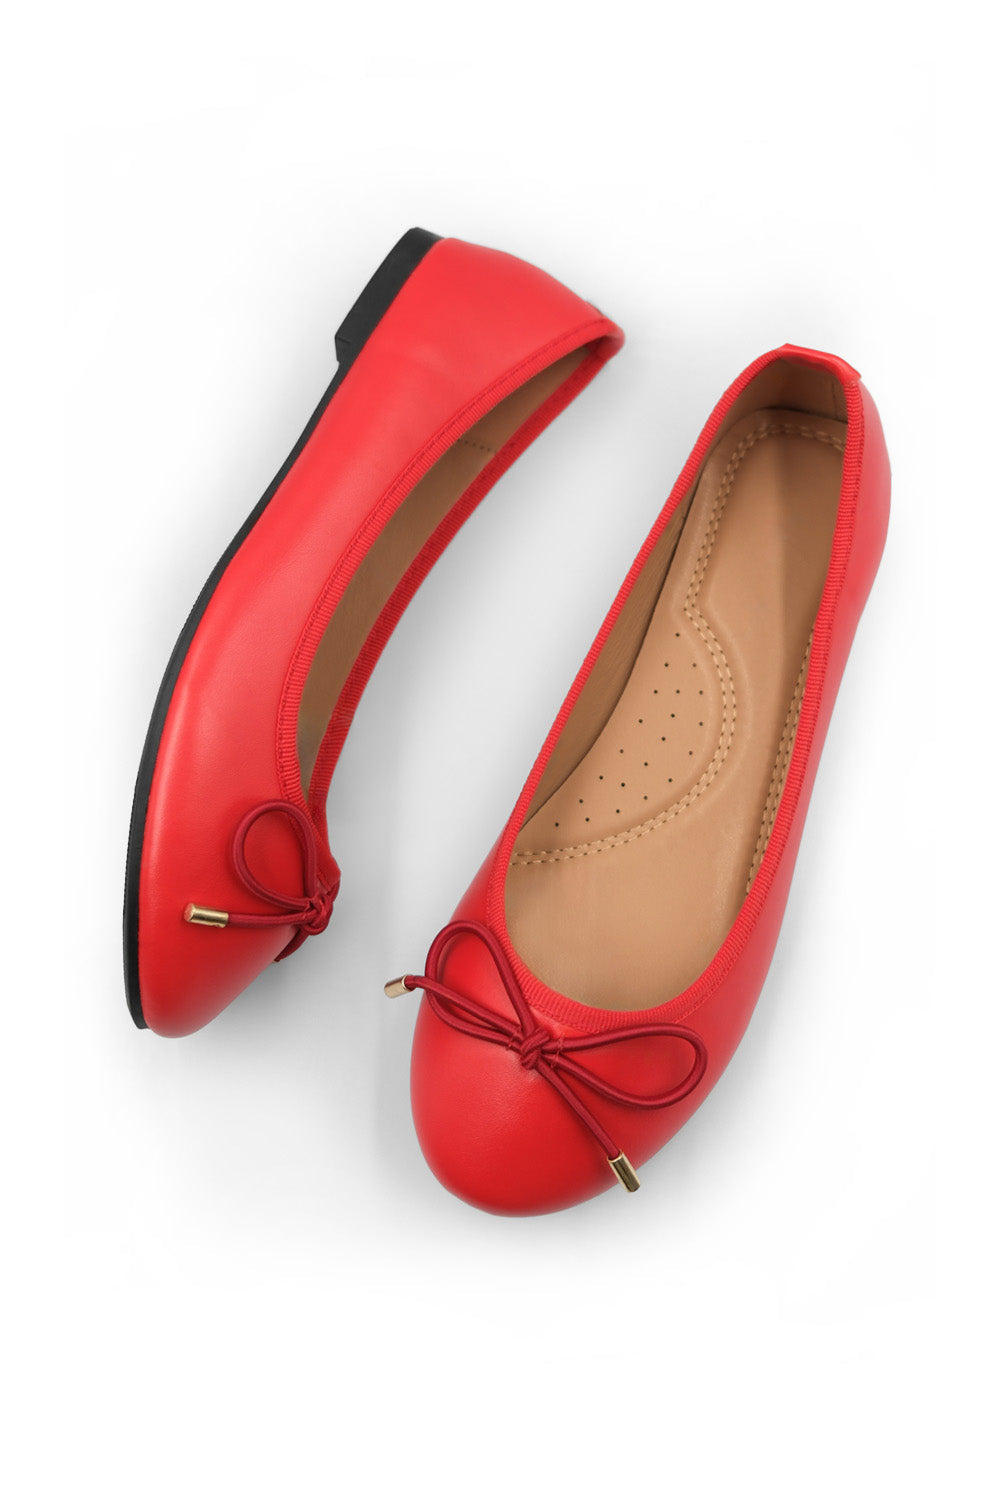 TALLULAH WIDE FIT SLIP ON FLAT PUMPS IN RED FAUX LEATHER